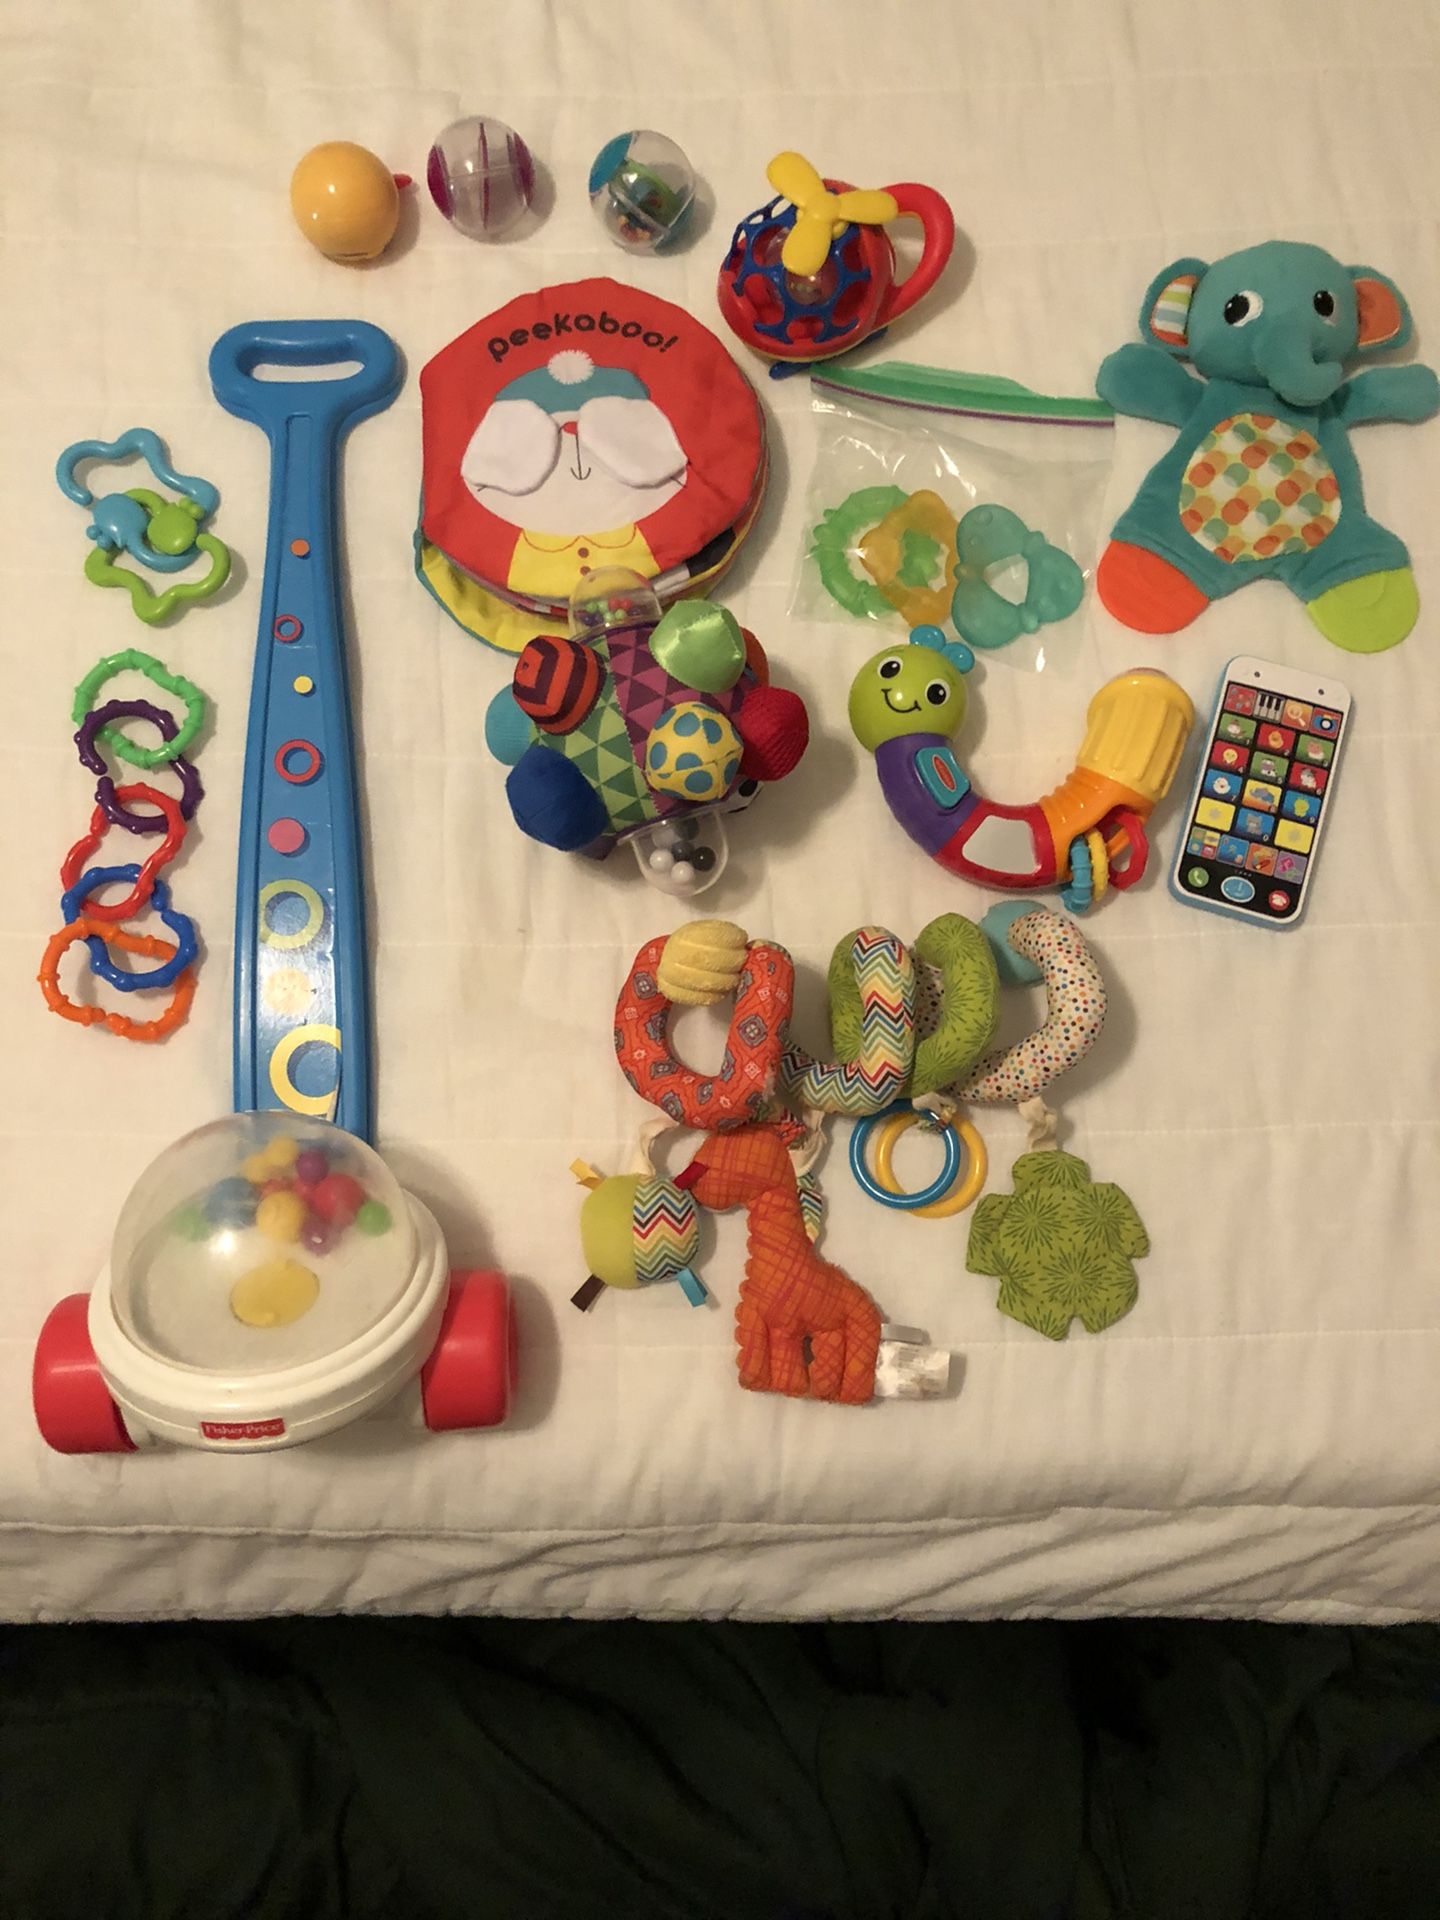 Assortment of baby toys, book, car seat toy and teethers